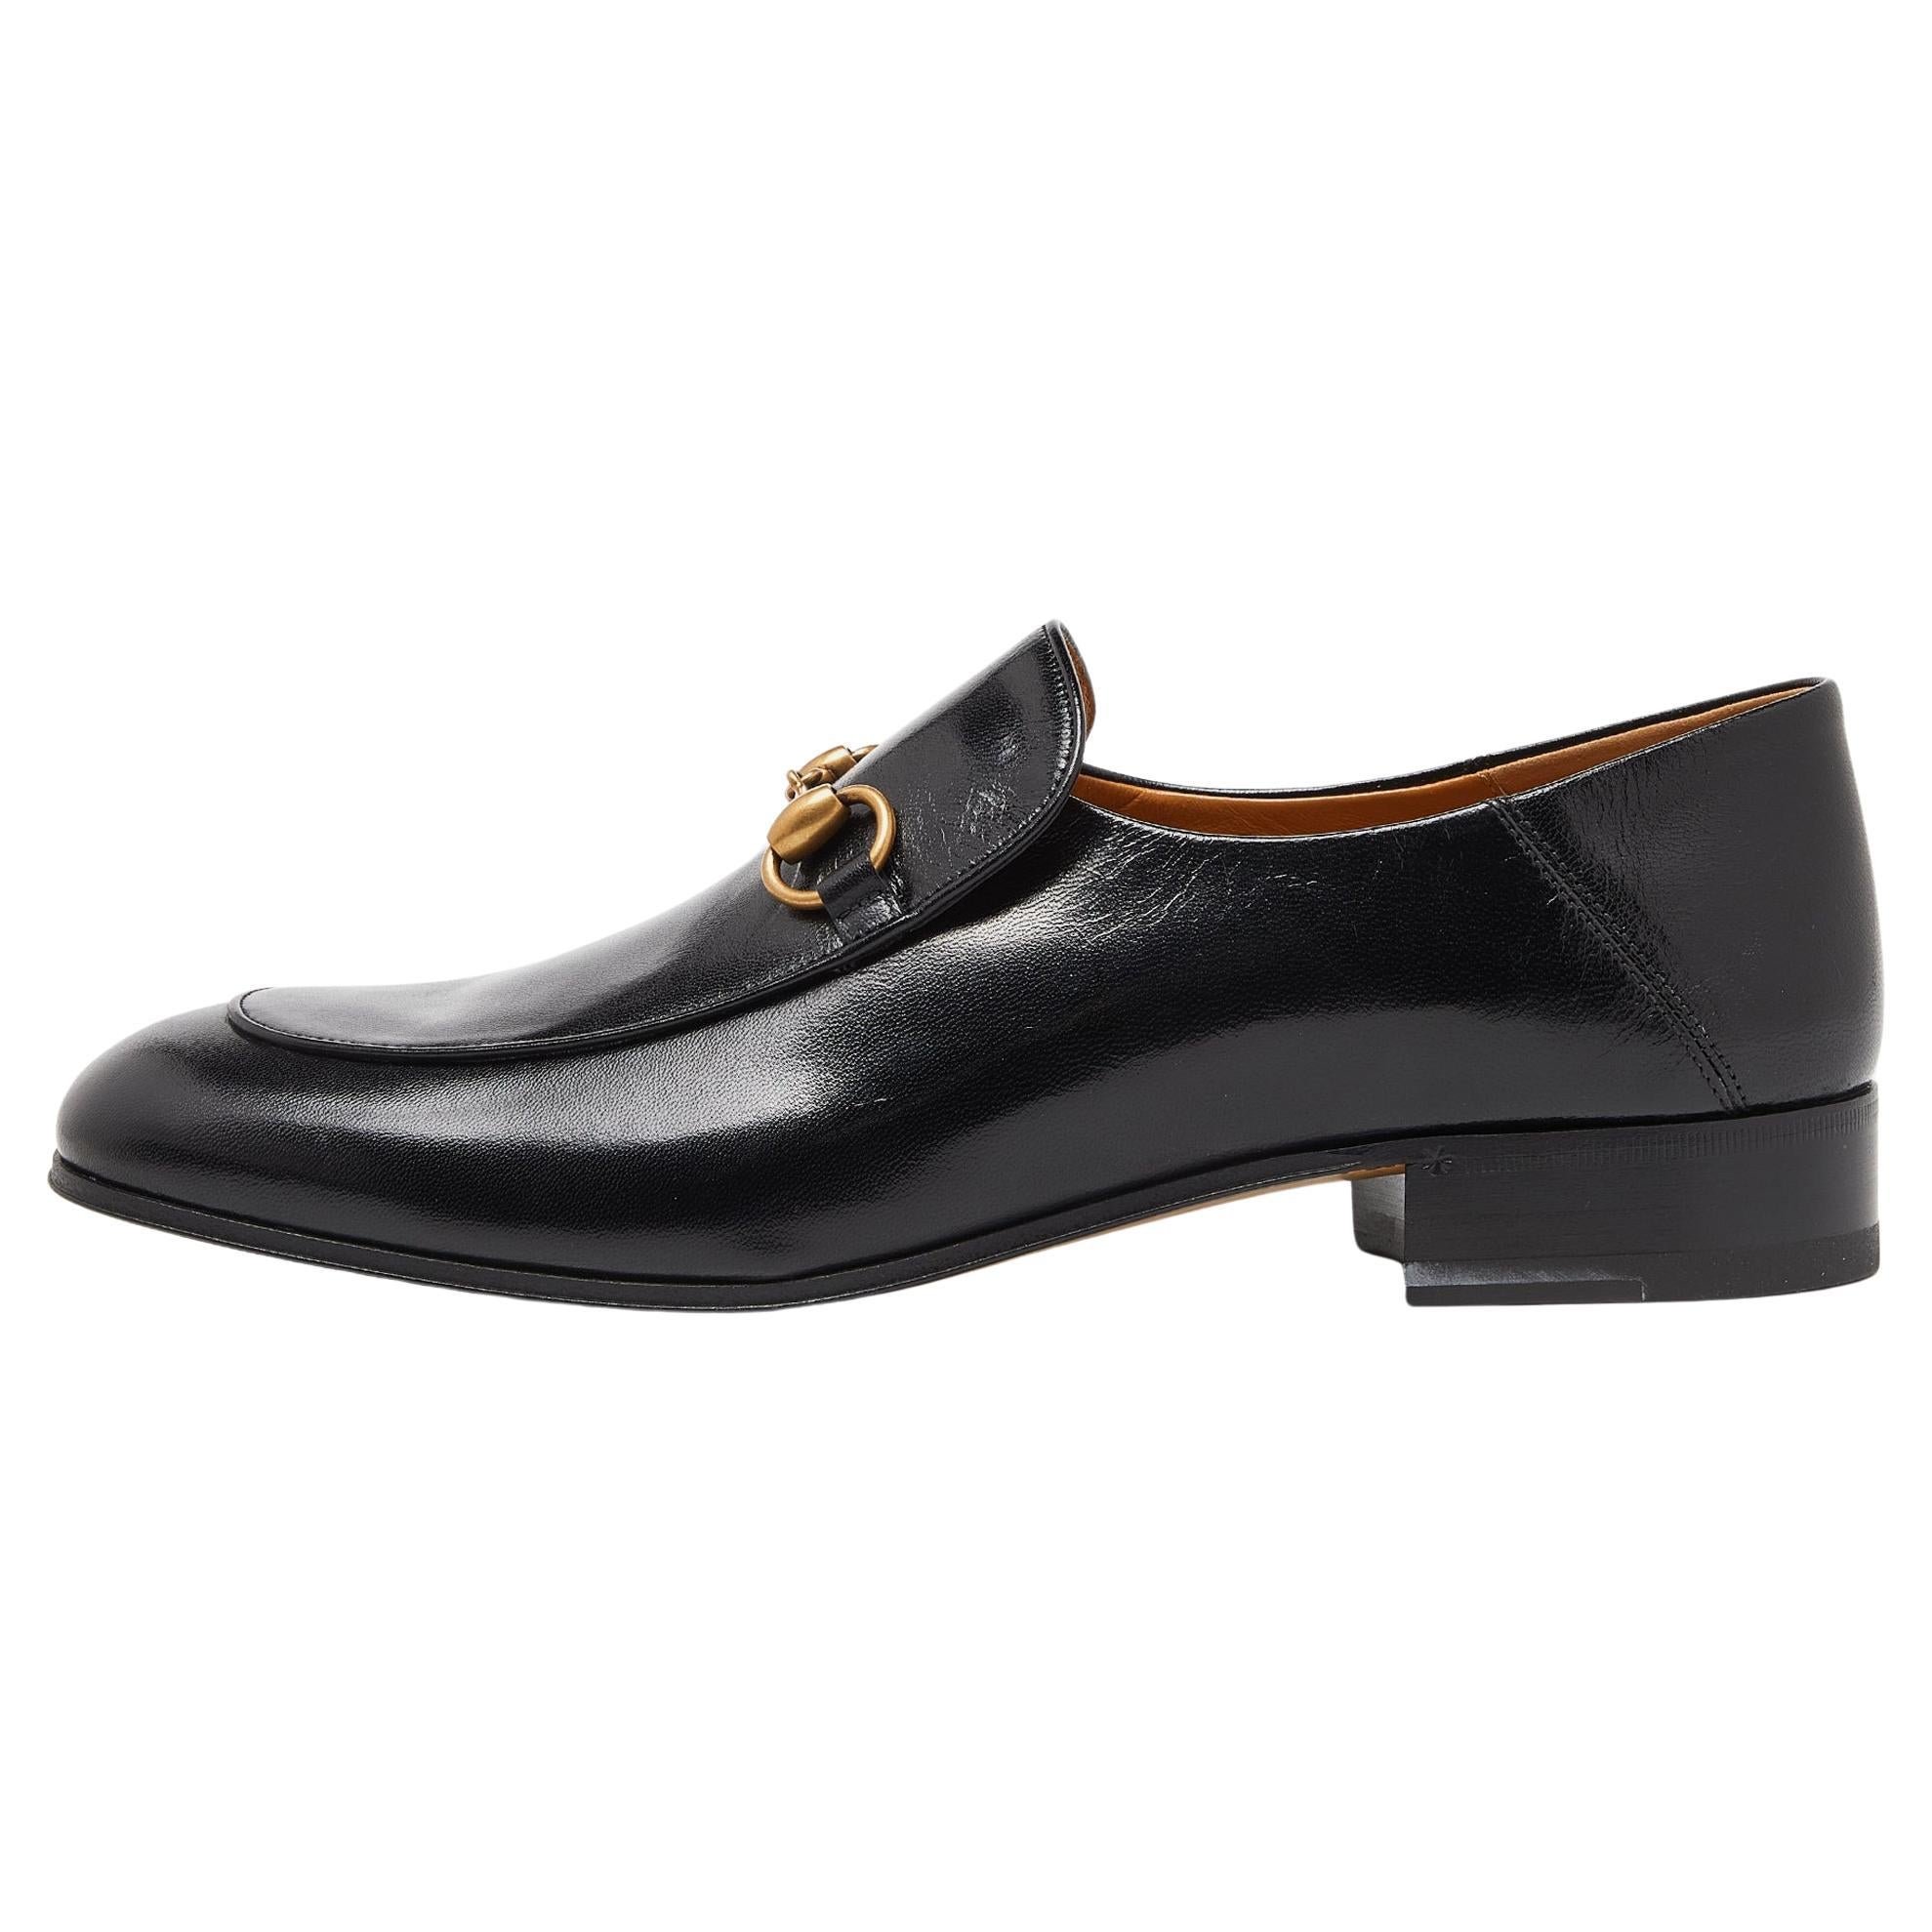 Gucci Black Leather Horsebit Loafers Size 43.5